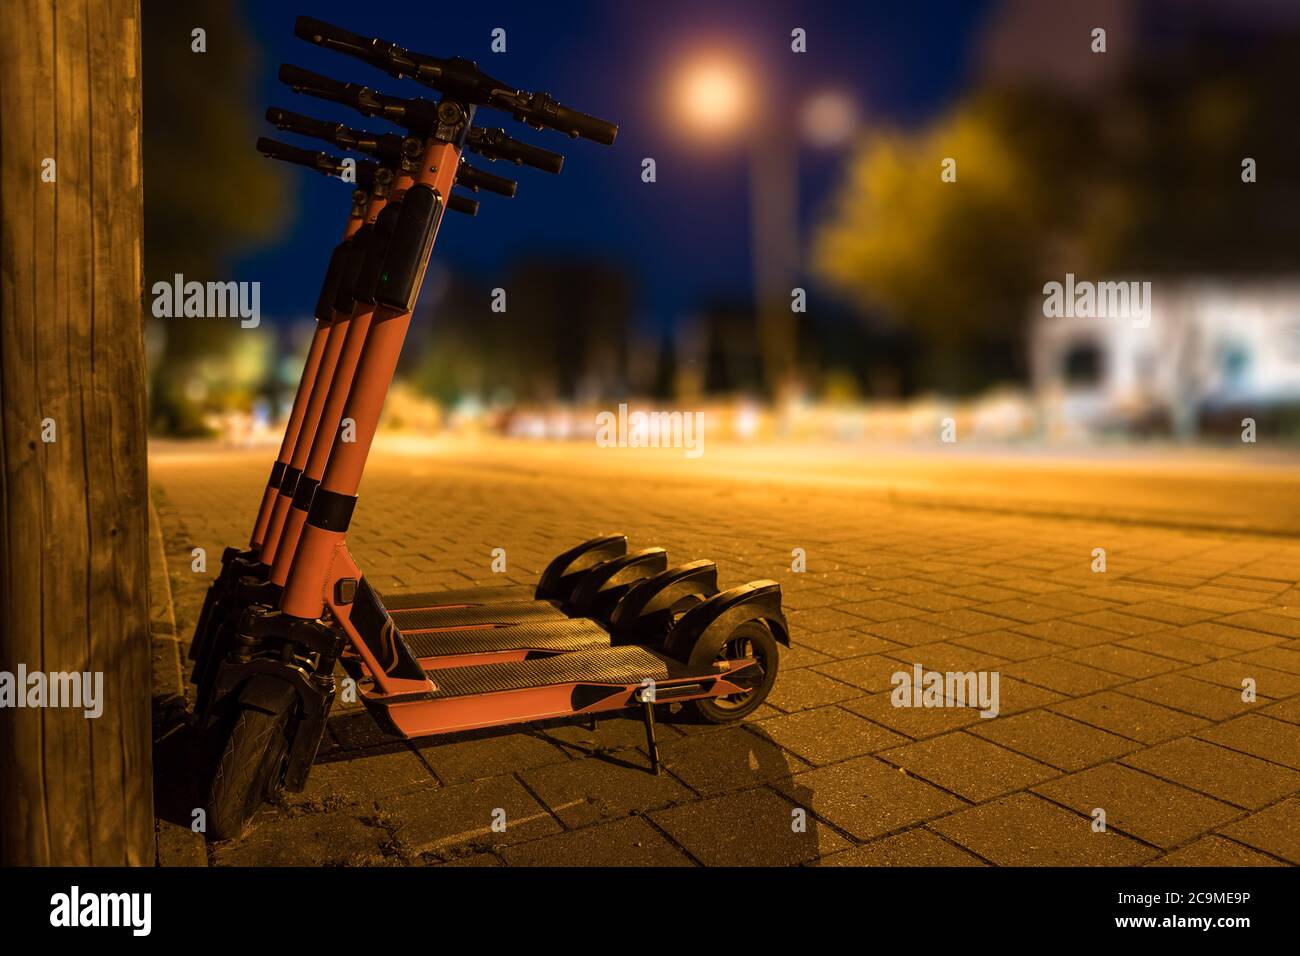 E-scooters for transport in urban environment, city at night Stock Photo